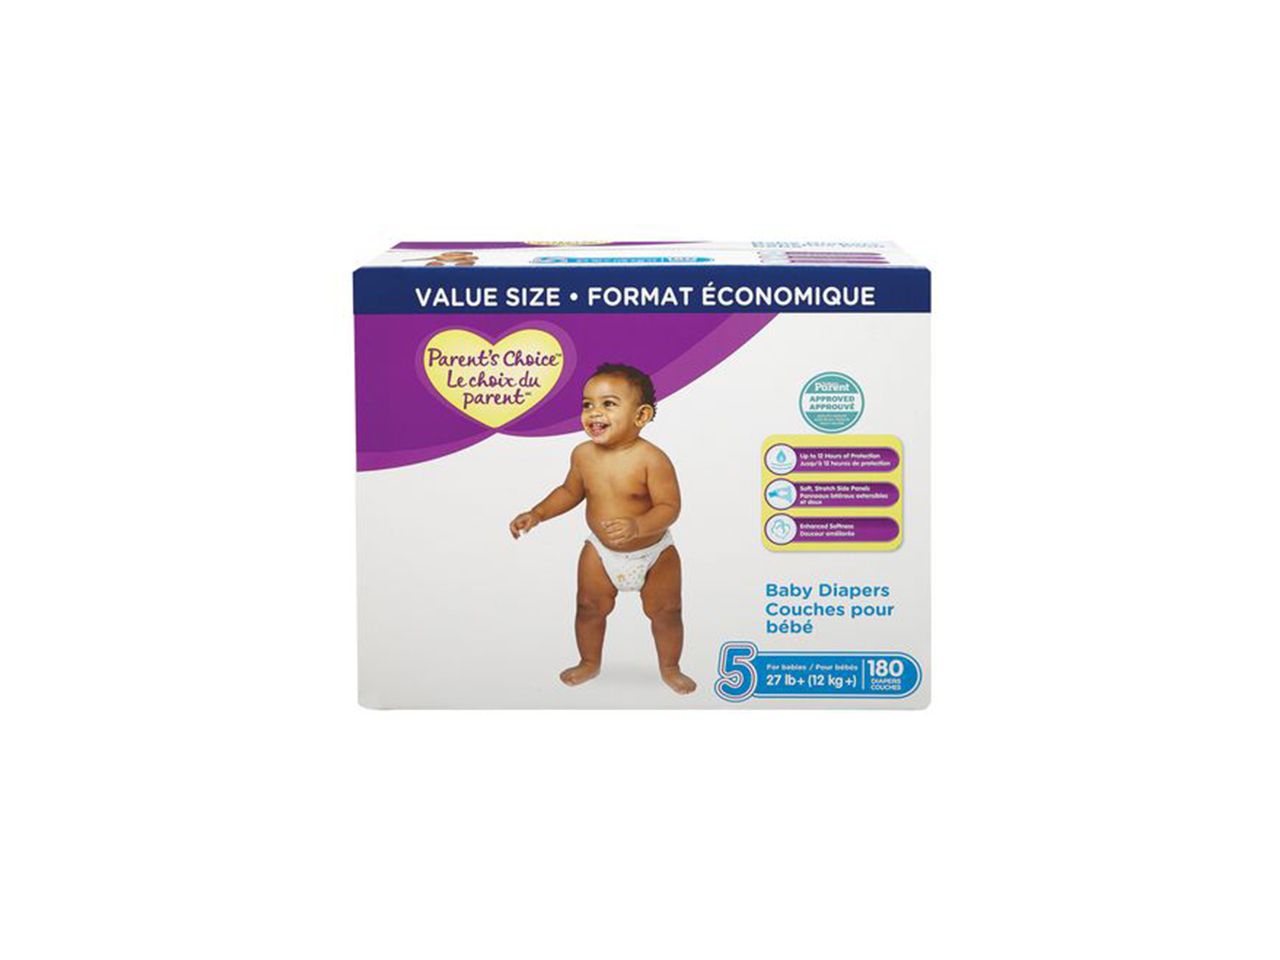 parents first choice diapers